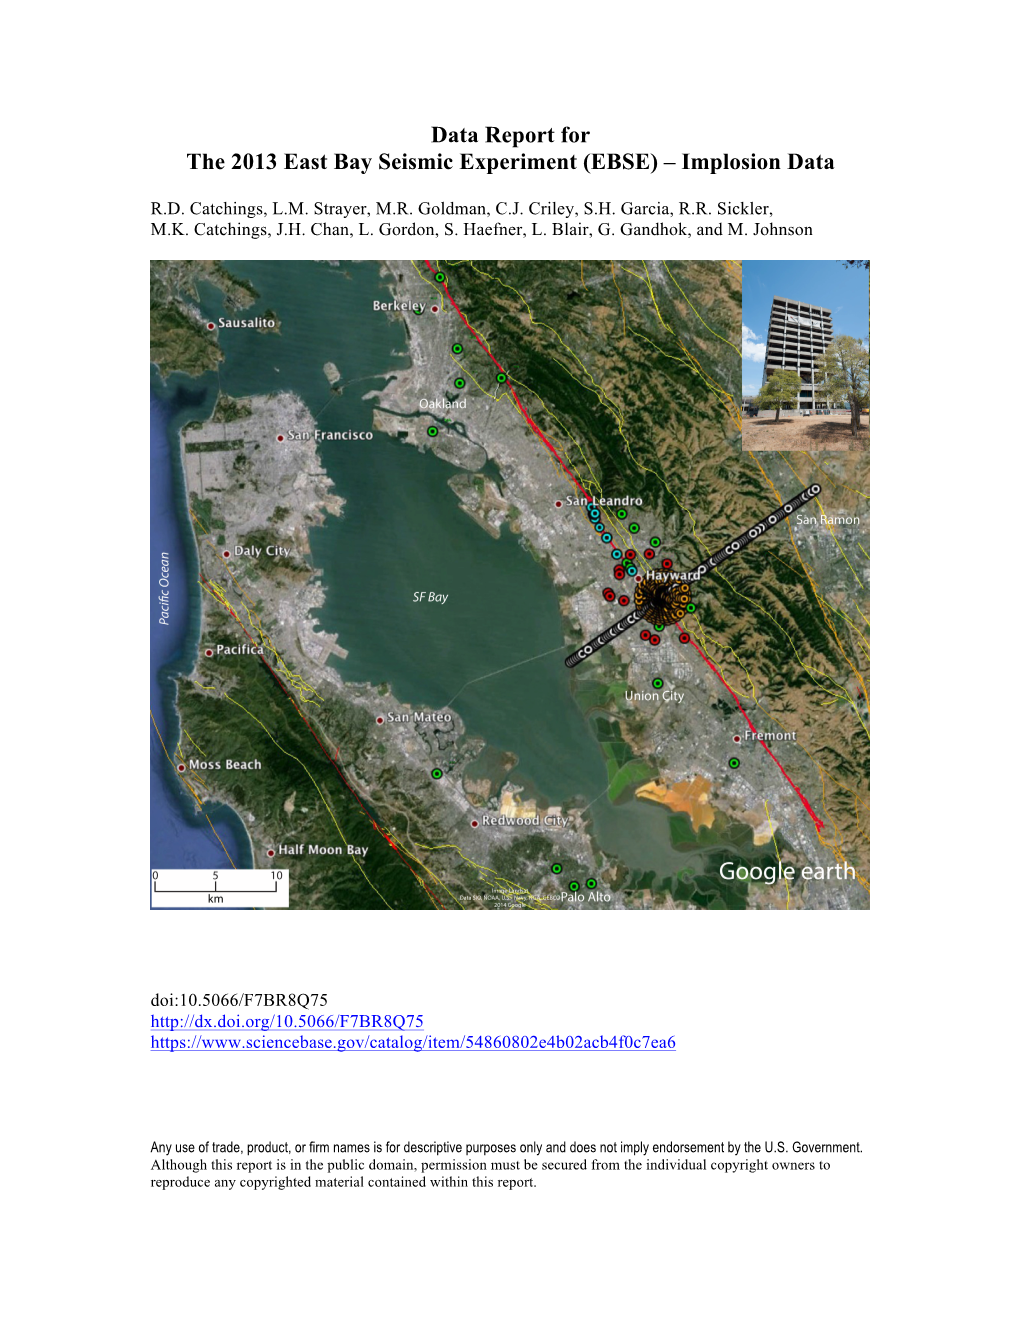 Data Report for the 2013 East Bay Seismic Experiment (EBSE) – Implosion Data